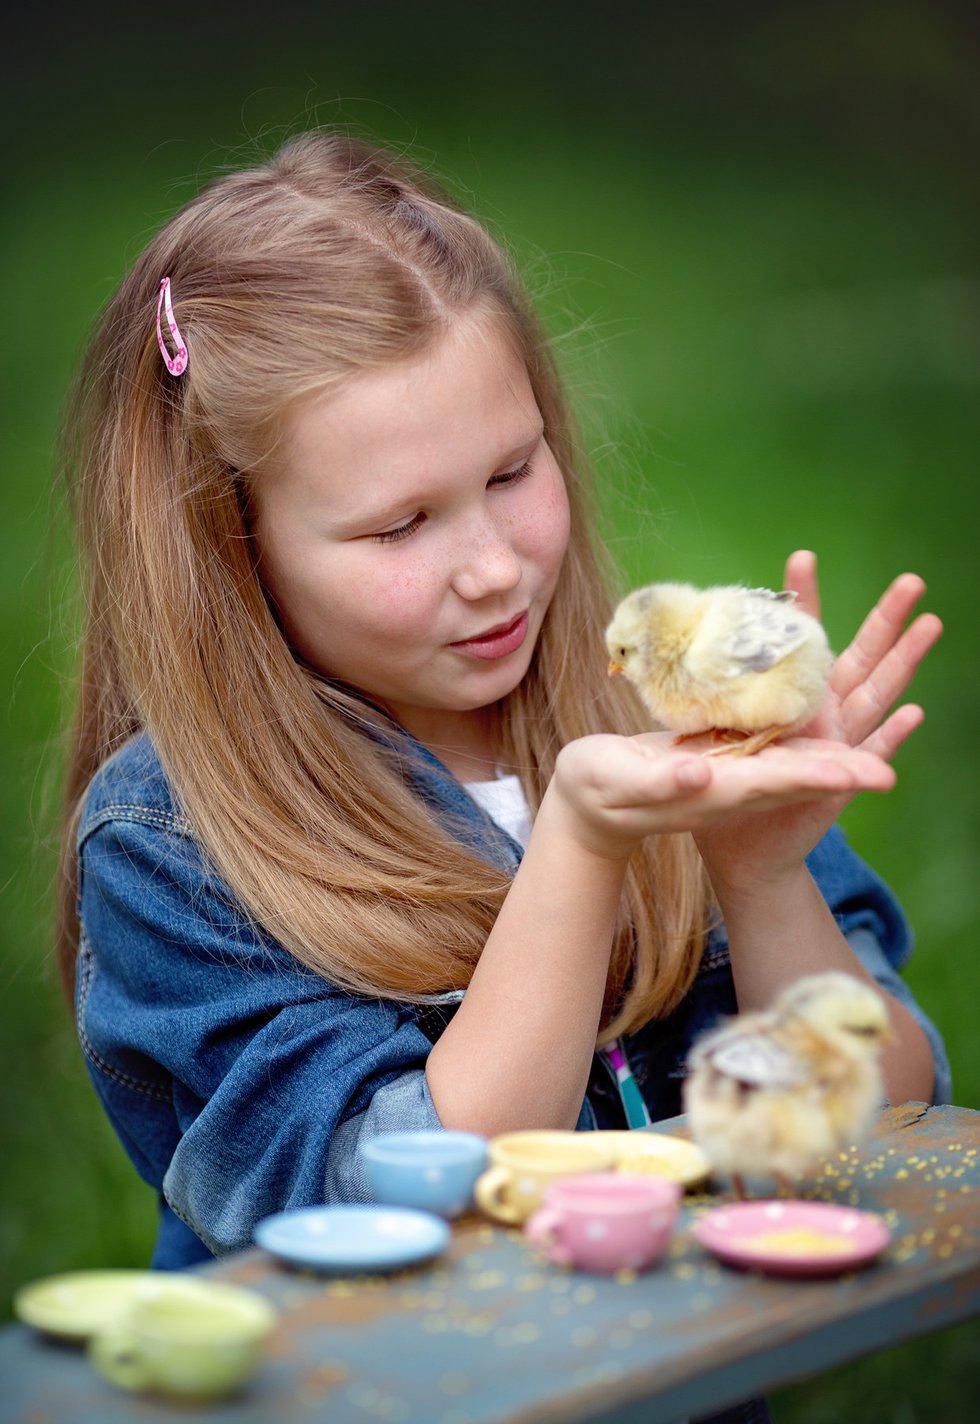 imagesevents27424girl-with-chick-jpg.jpe